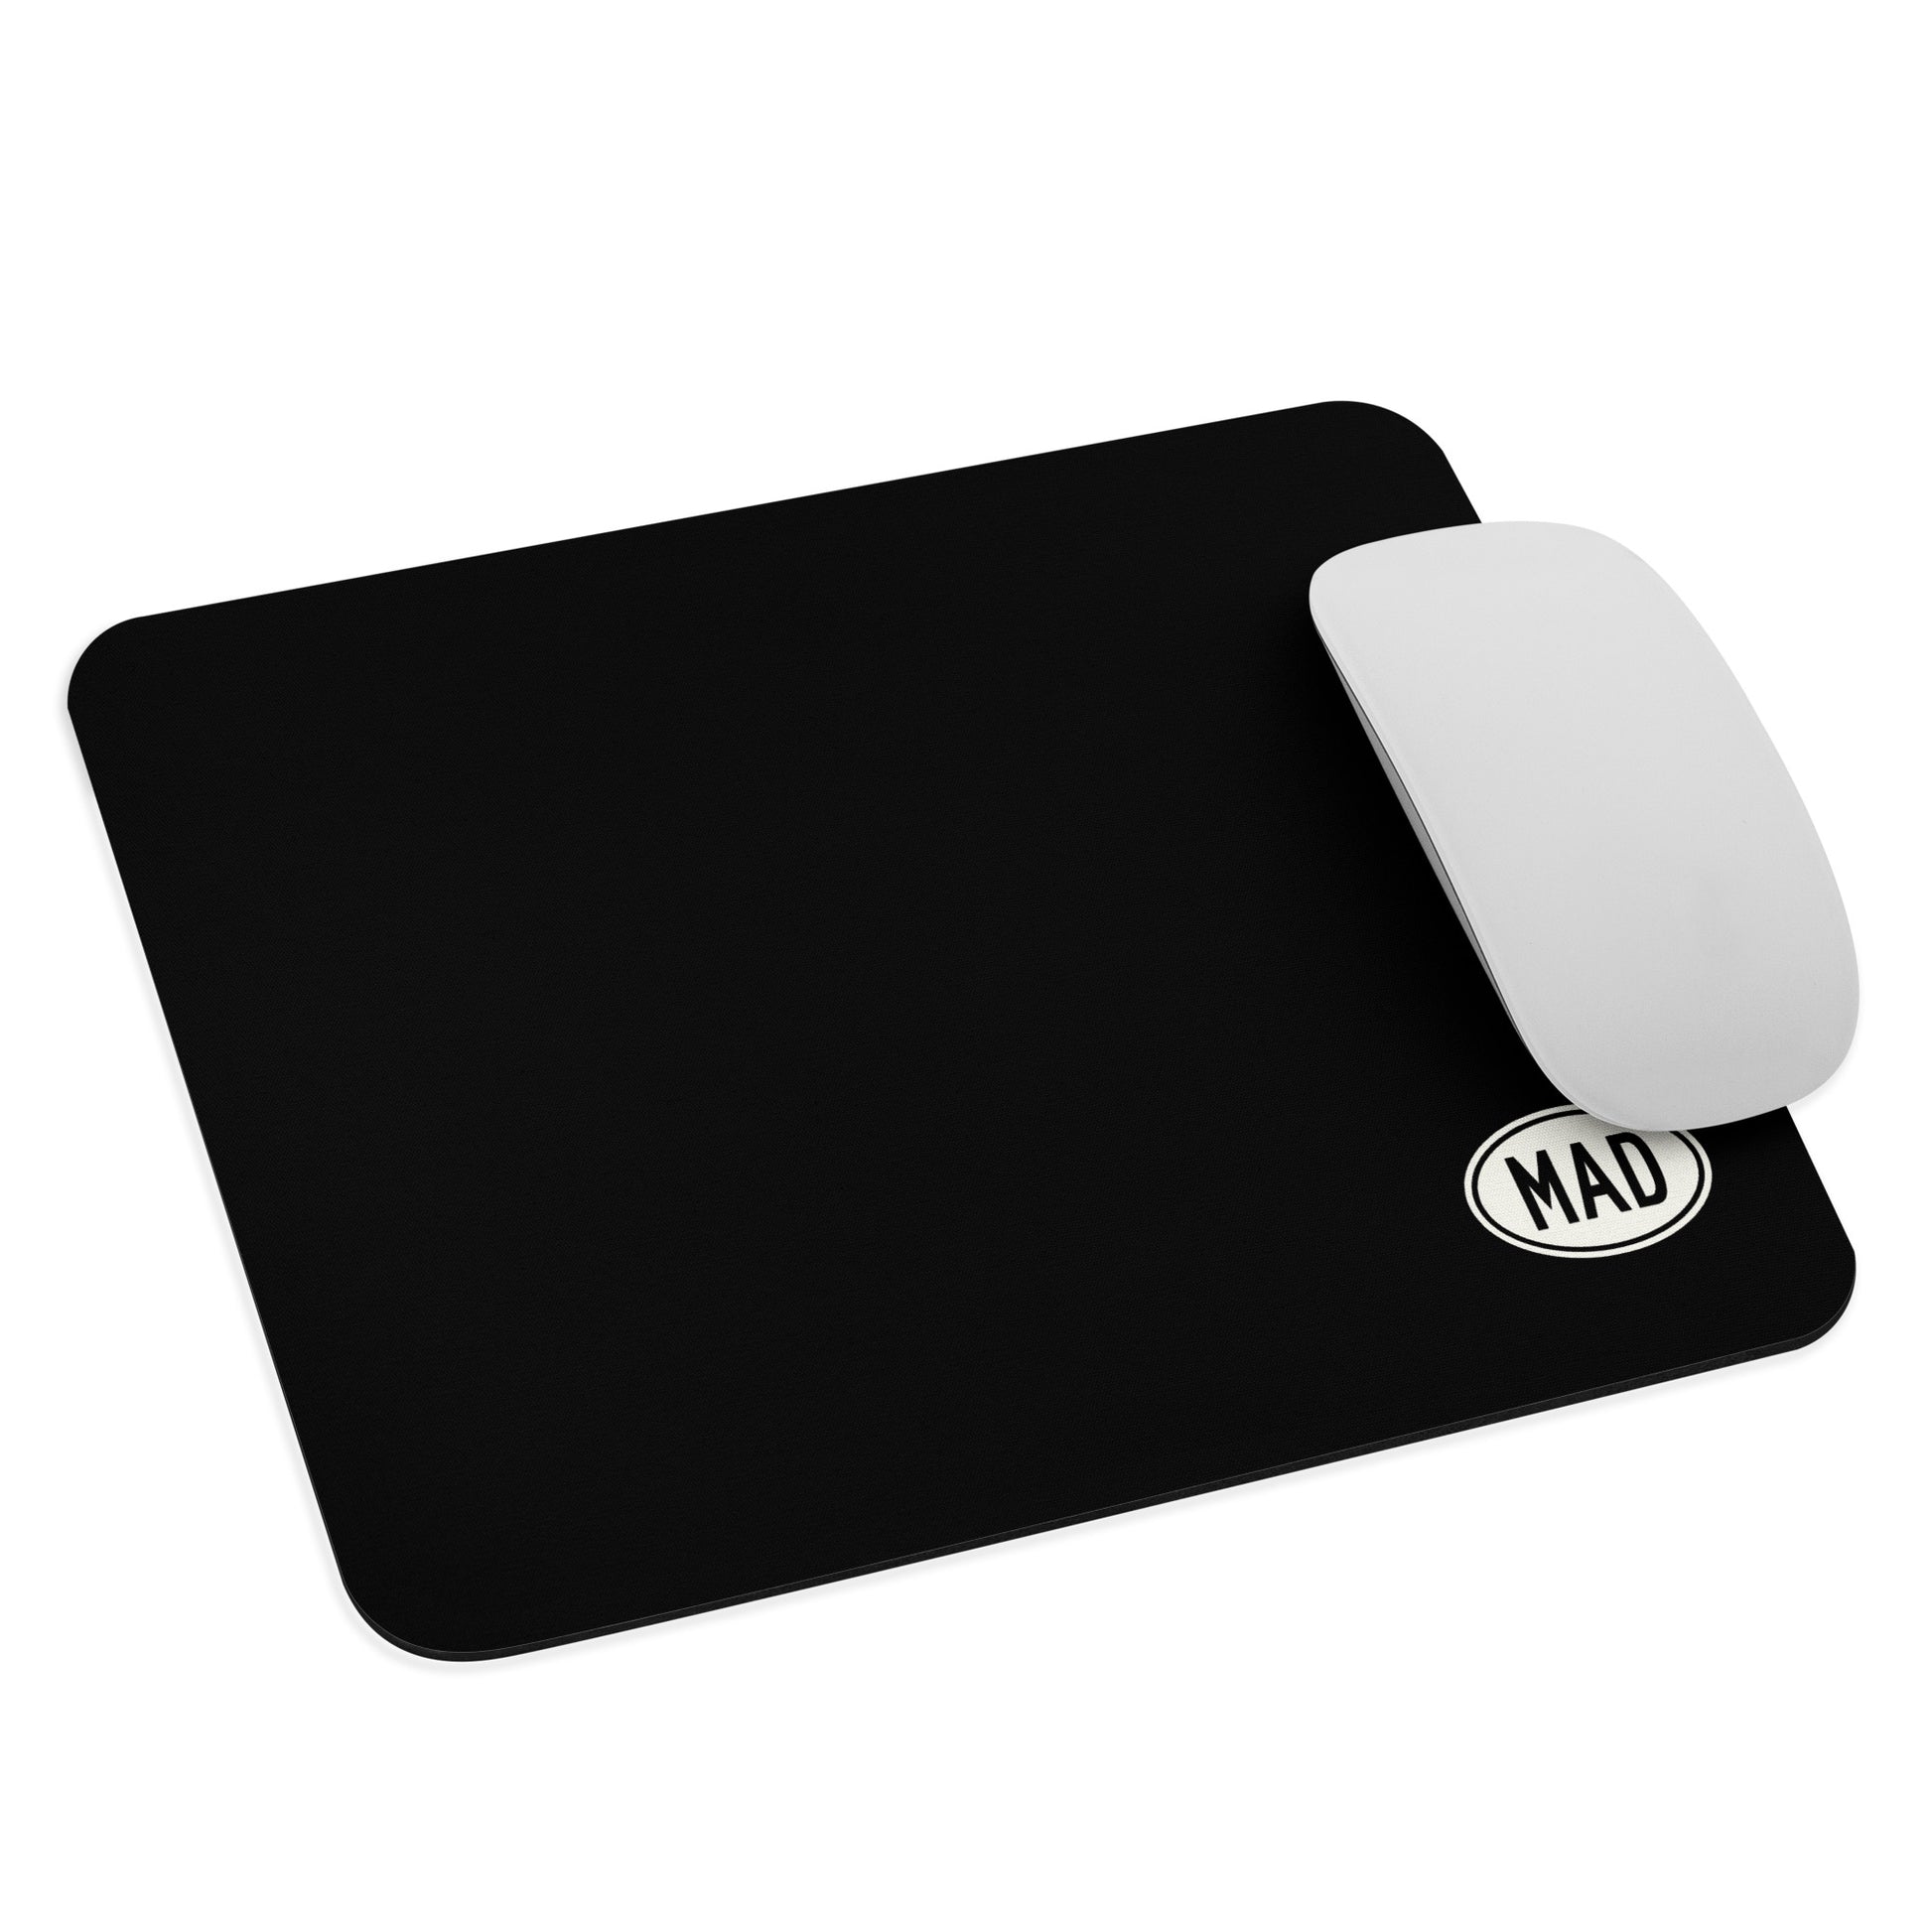 Unique Travel Gift Mouse Pad - White Oval • MAD Madrid • YHM Designs - Image 03